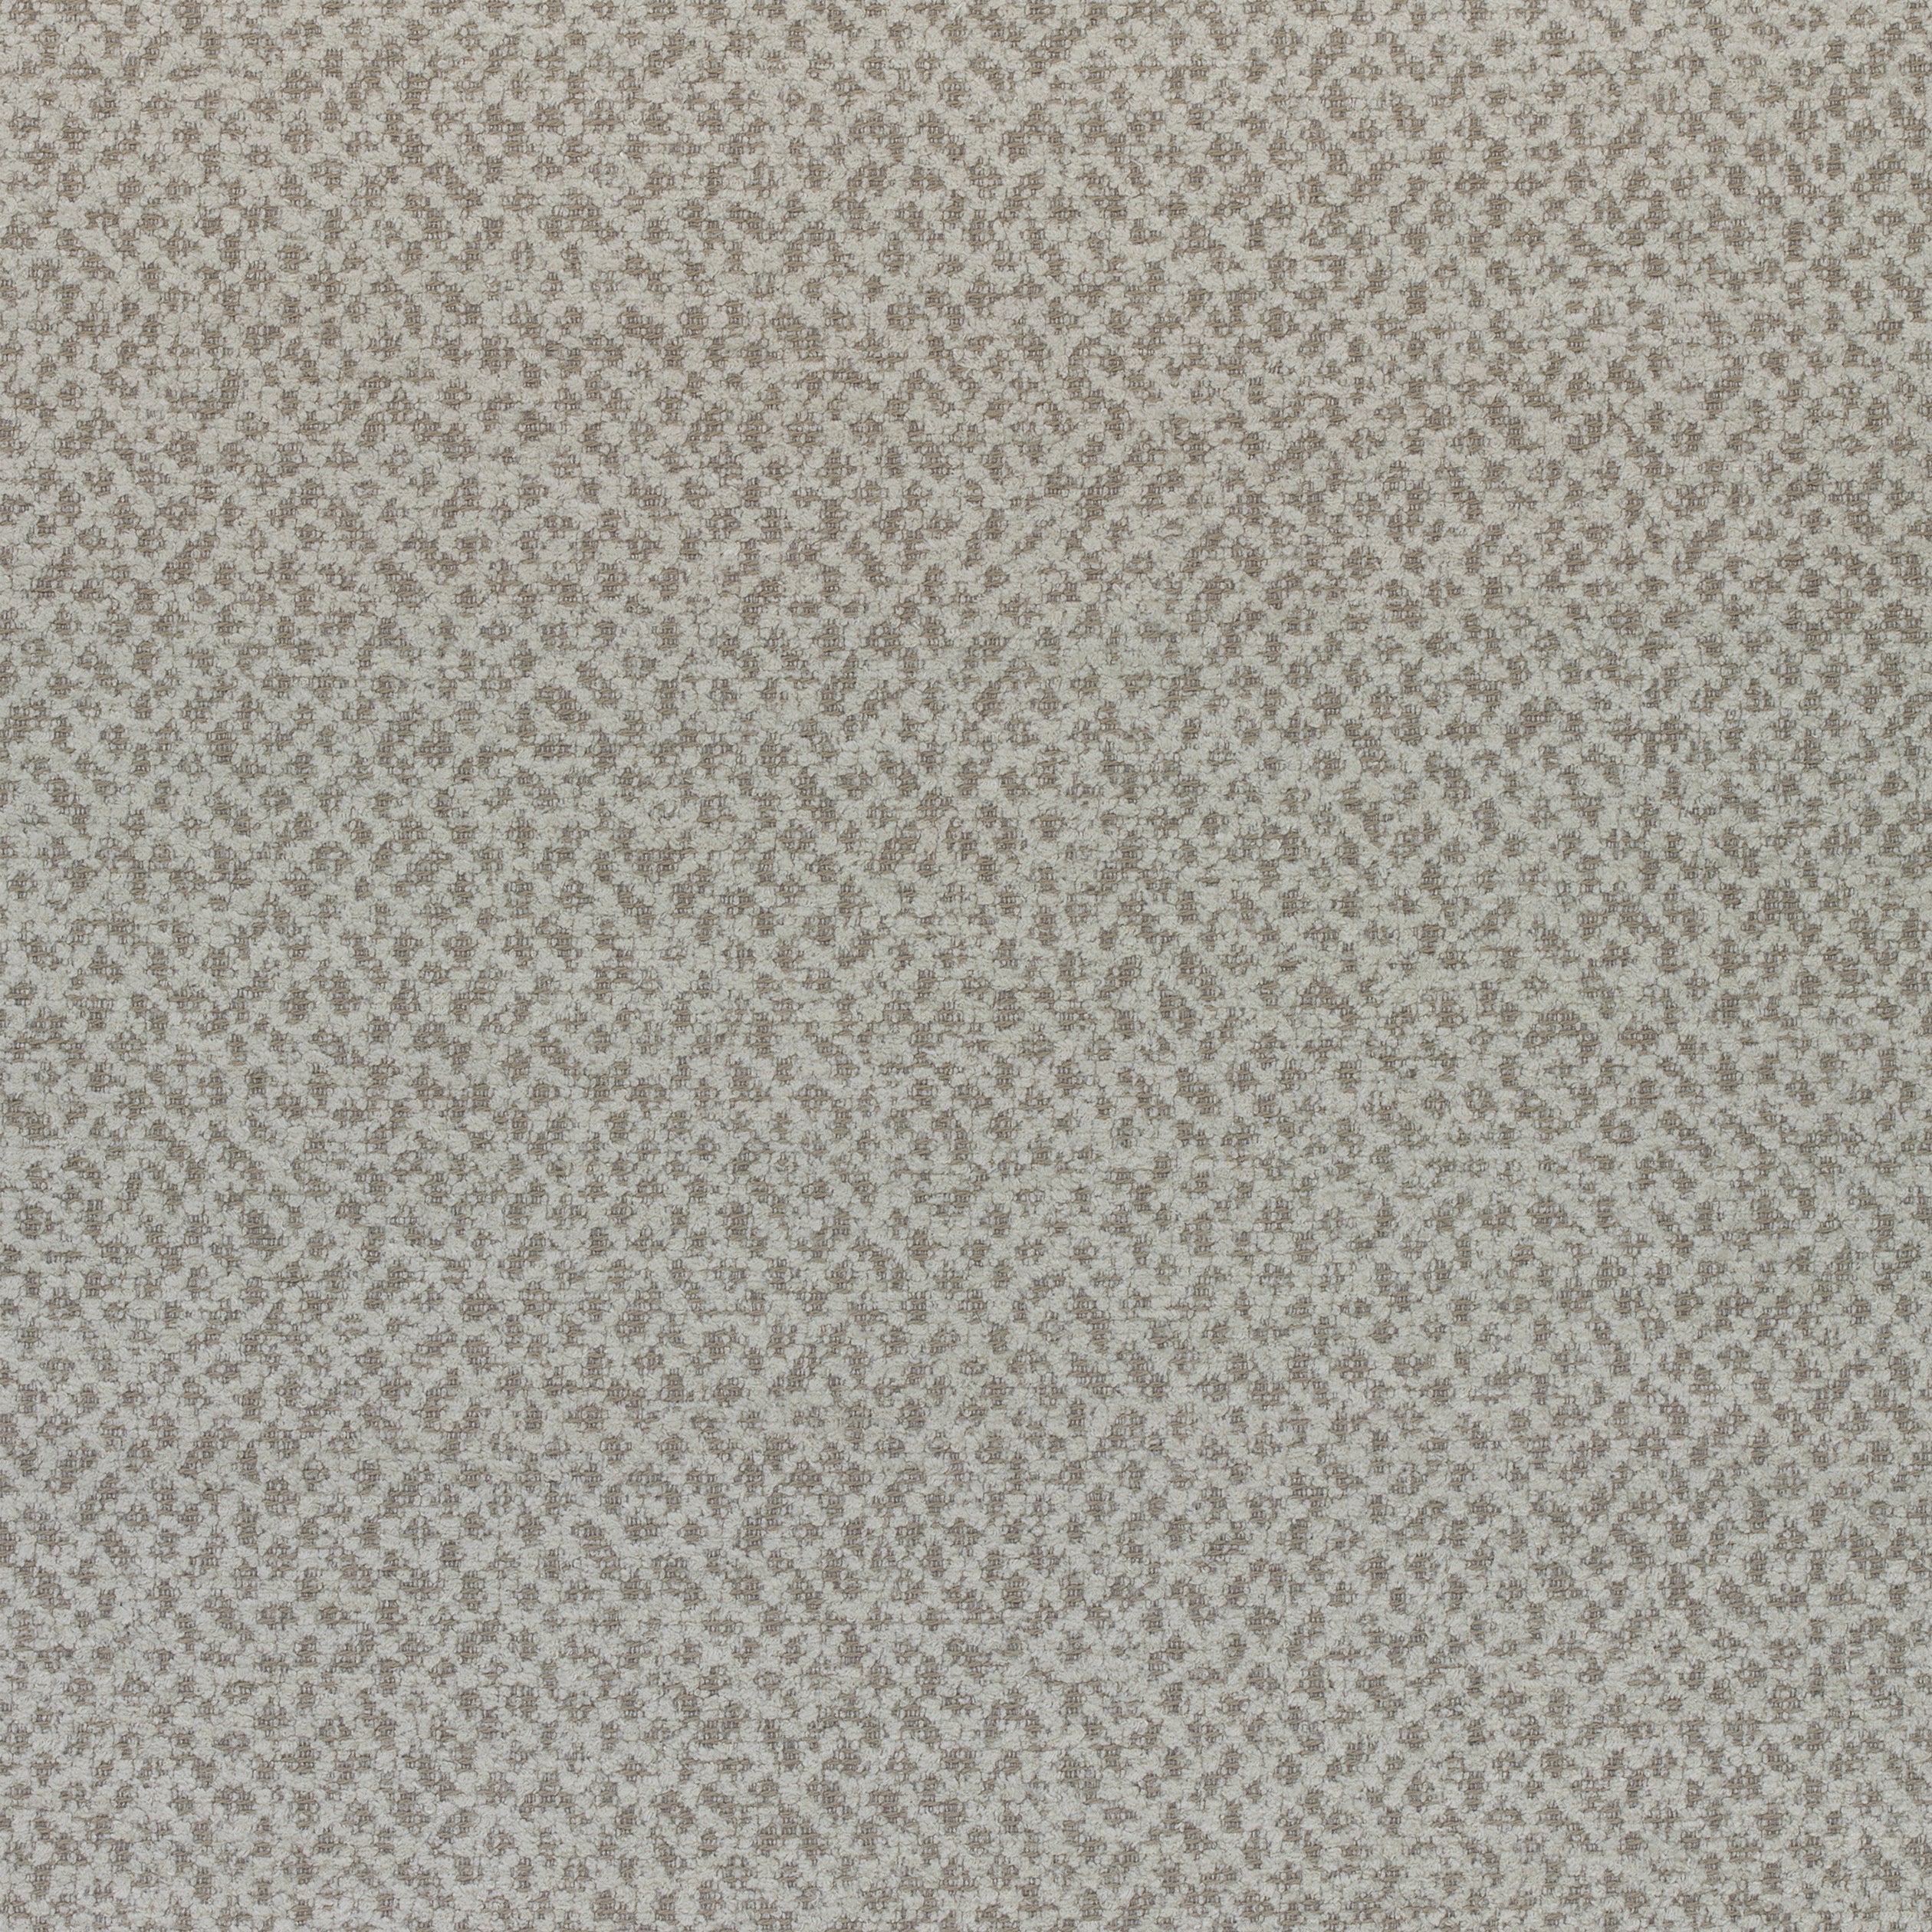 Gryffin fabric in stone color - pattern number W80411 - by Thibaut in the Mosaic collection